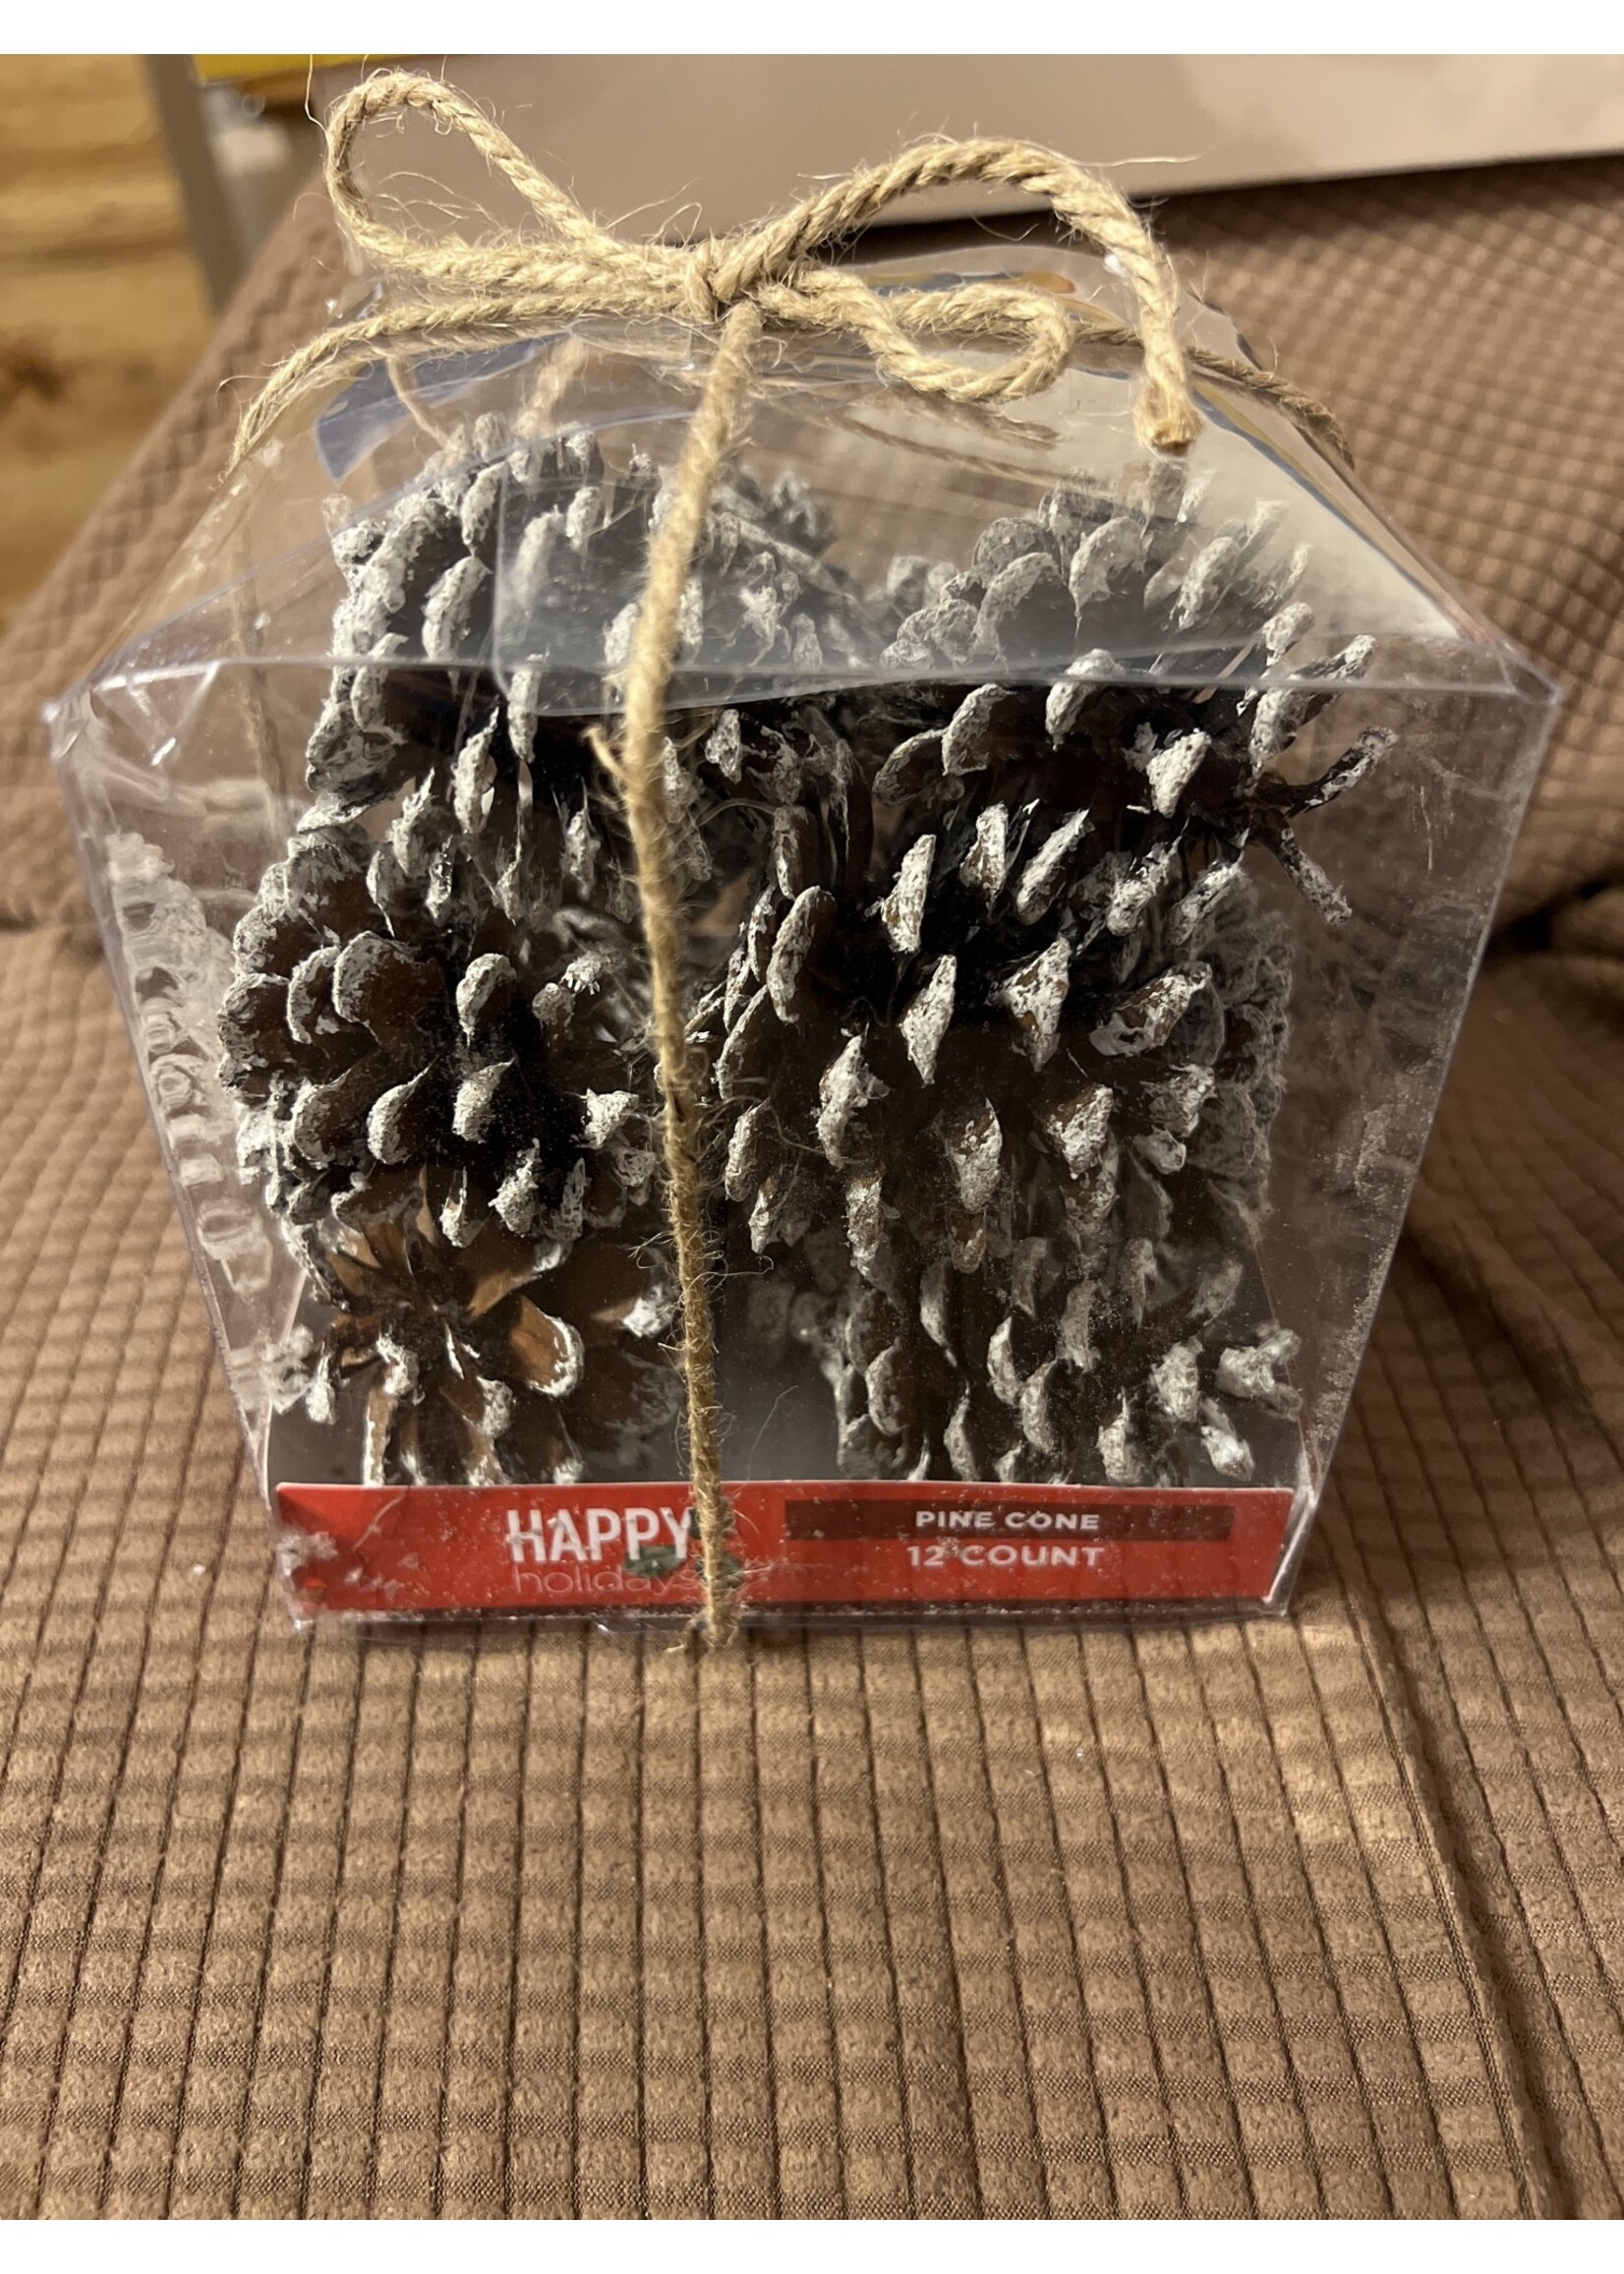 Happy Holidays - Frosted Pine Cones 12ct